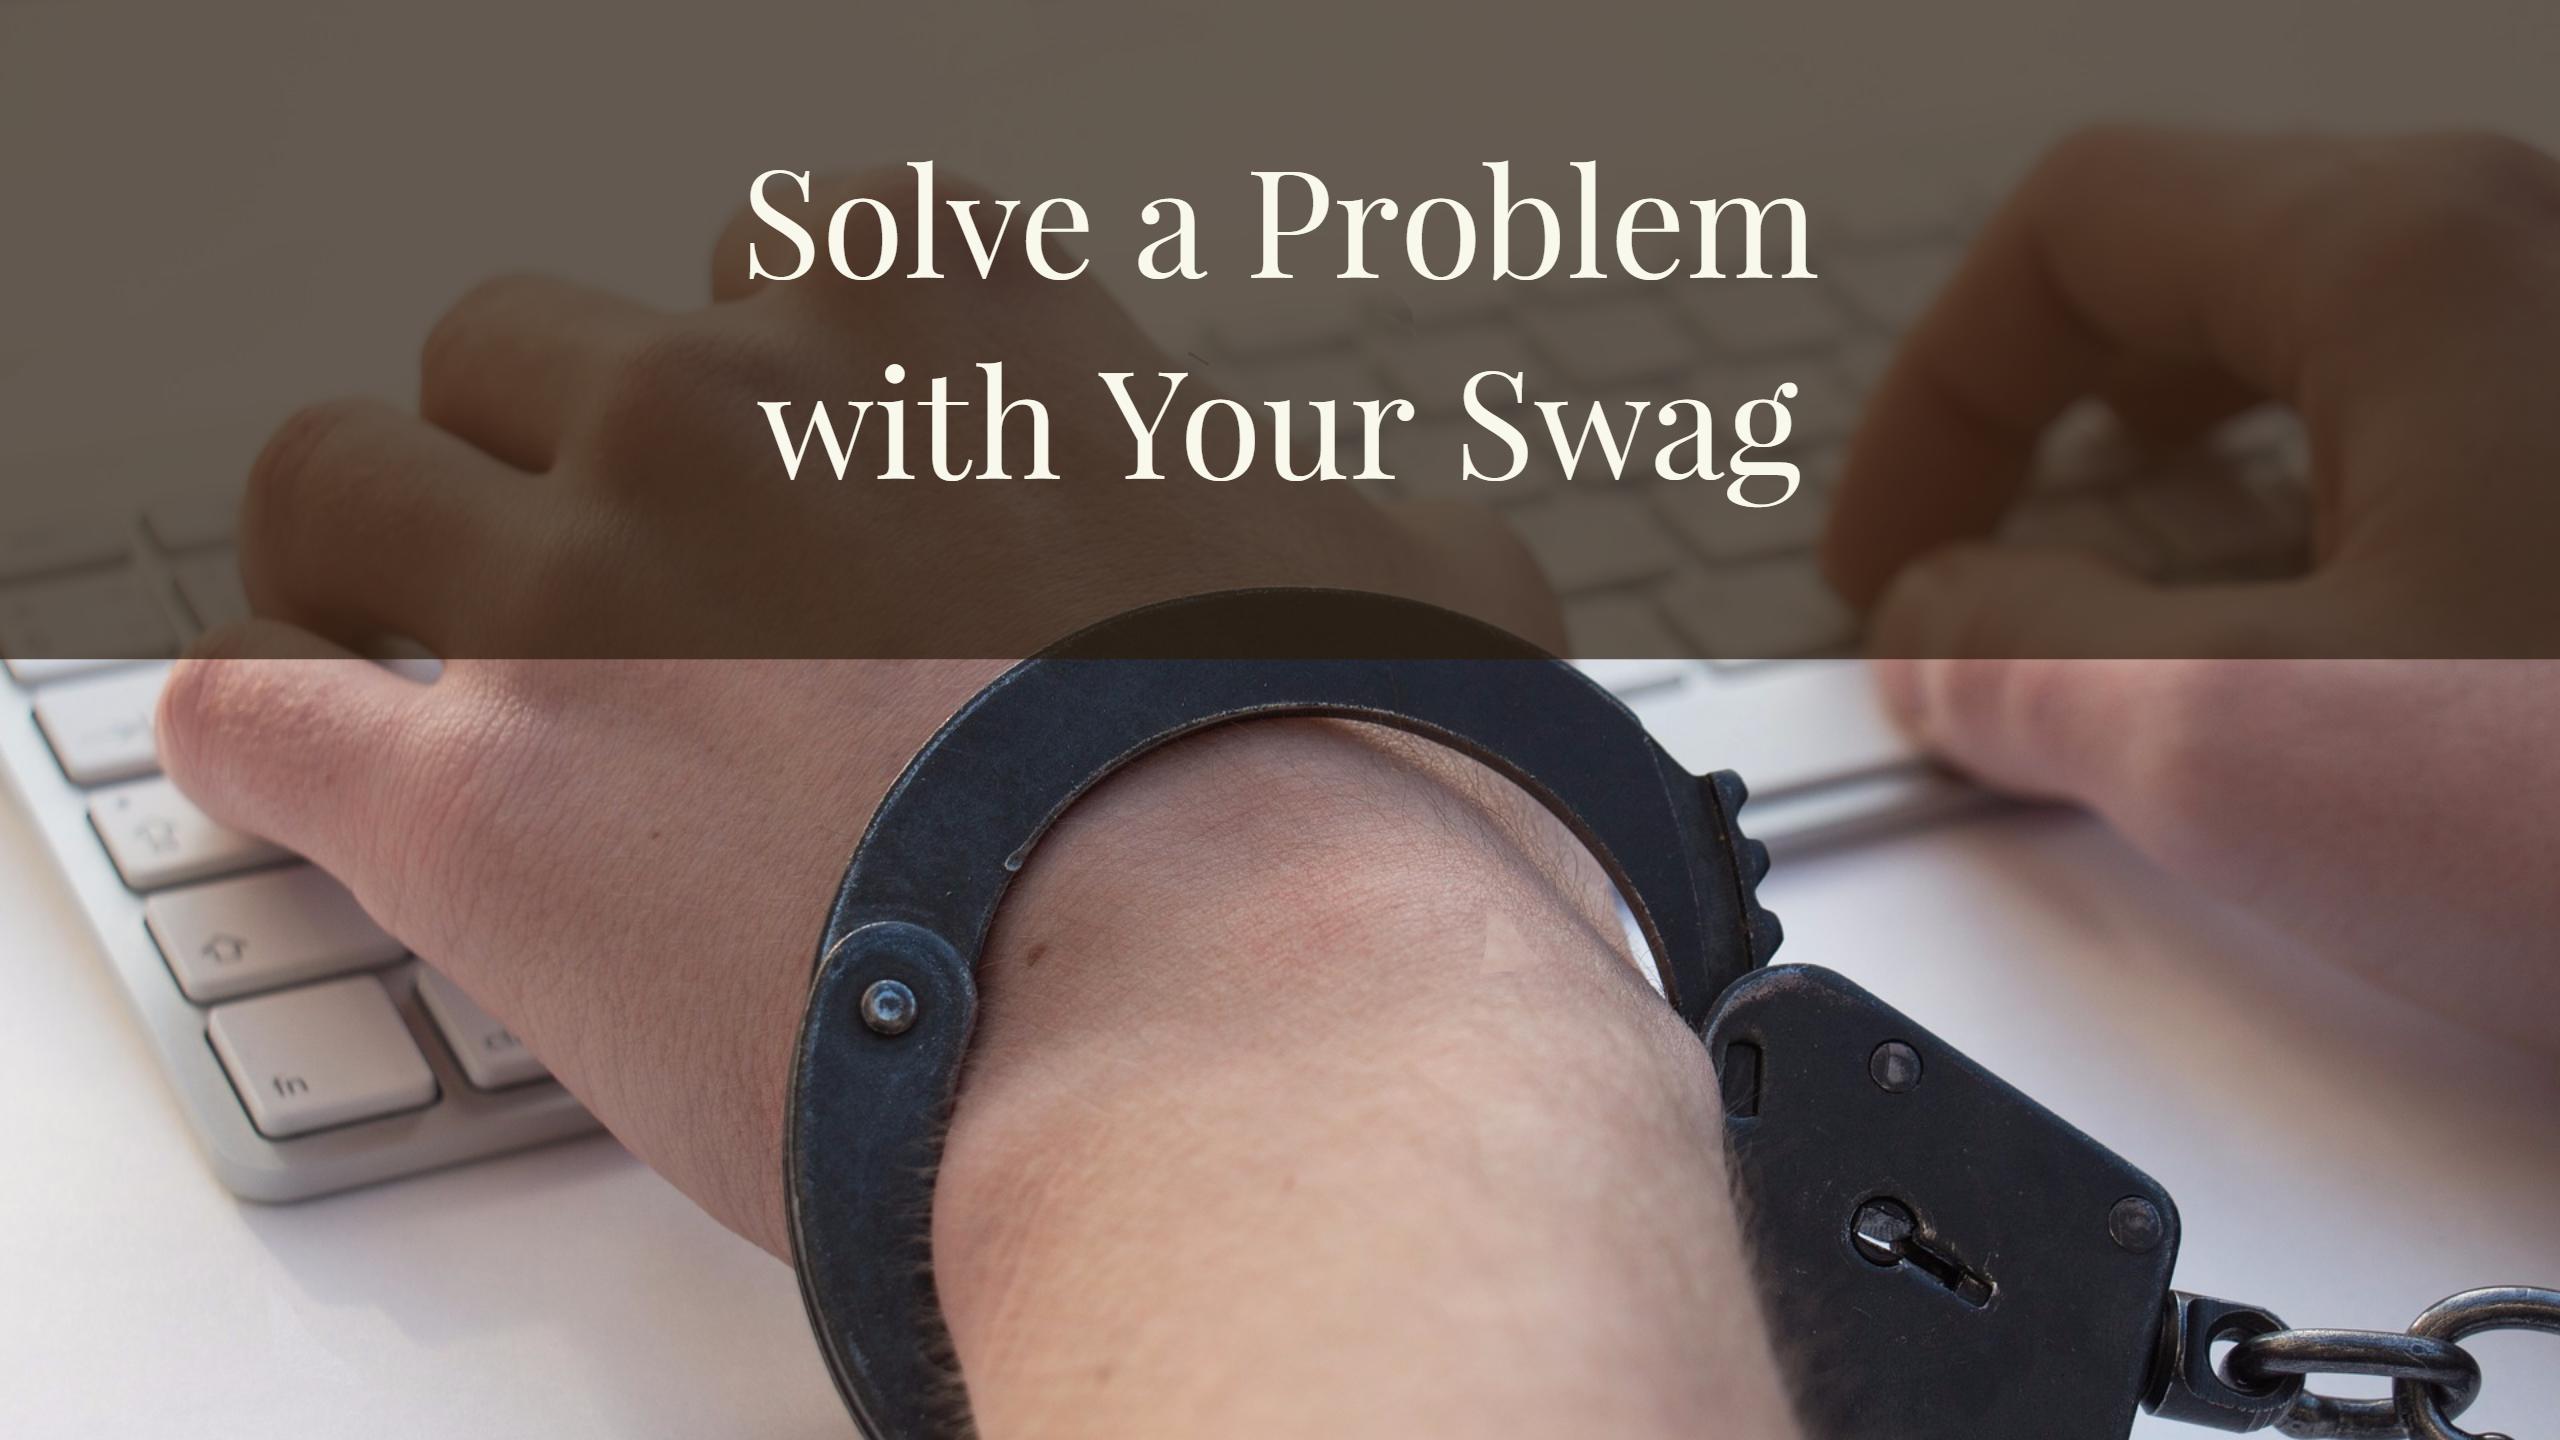 Solve a Problem with Your Swag